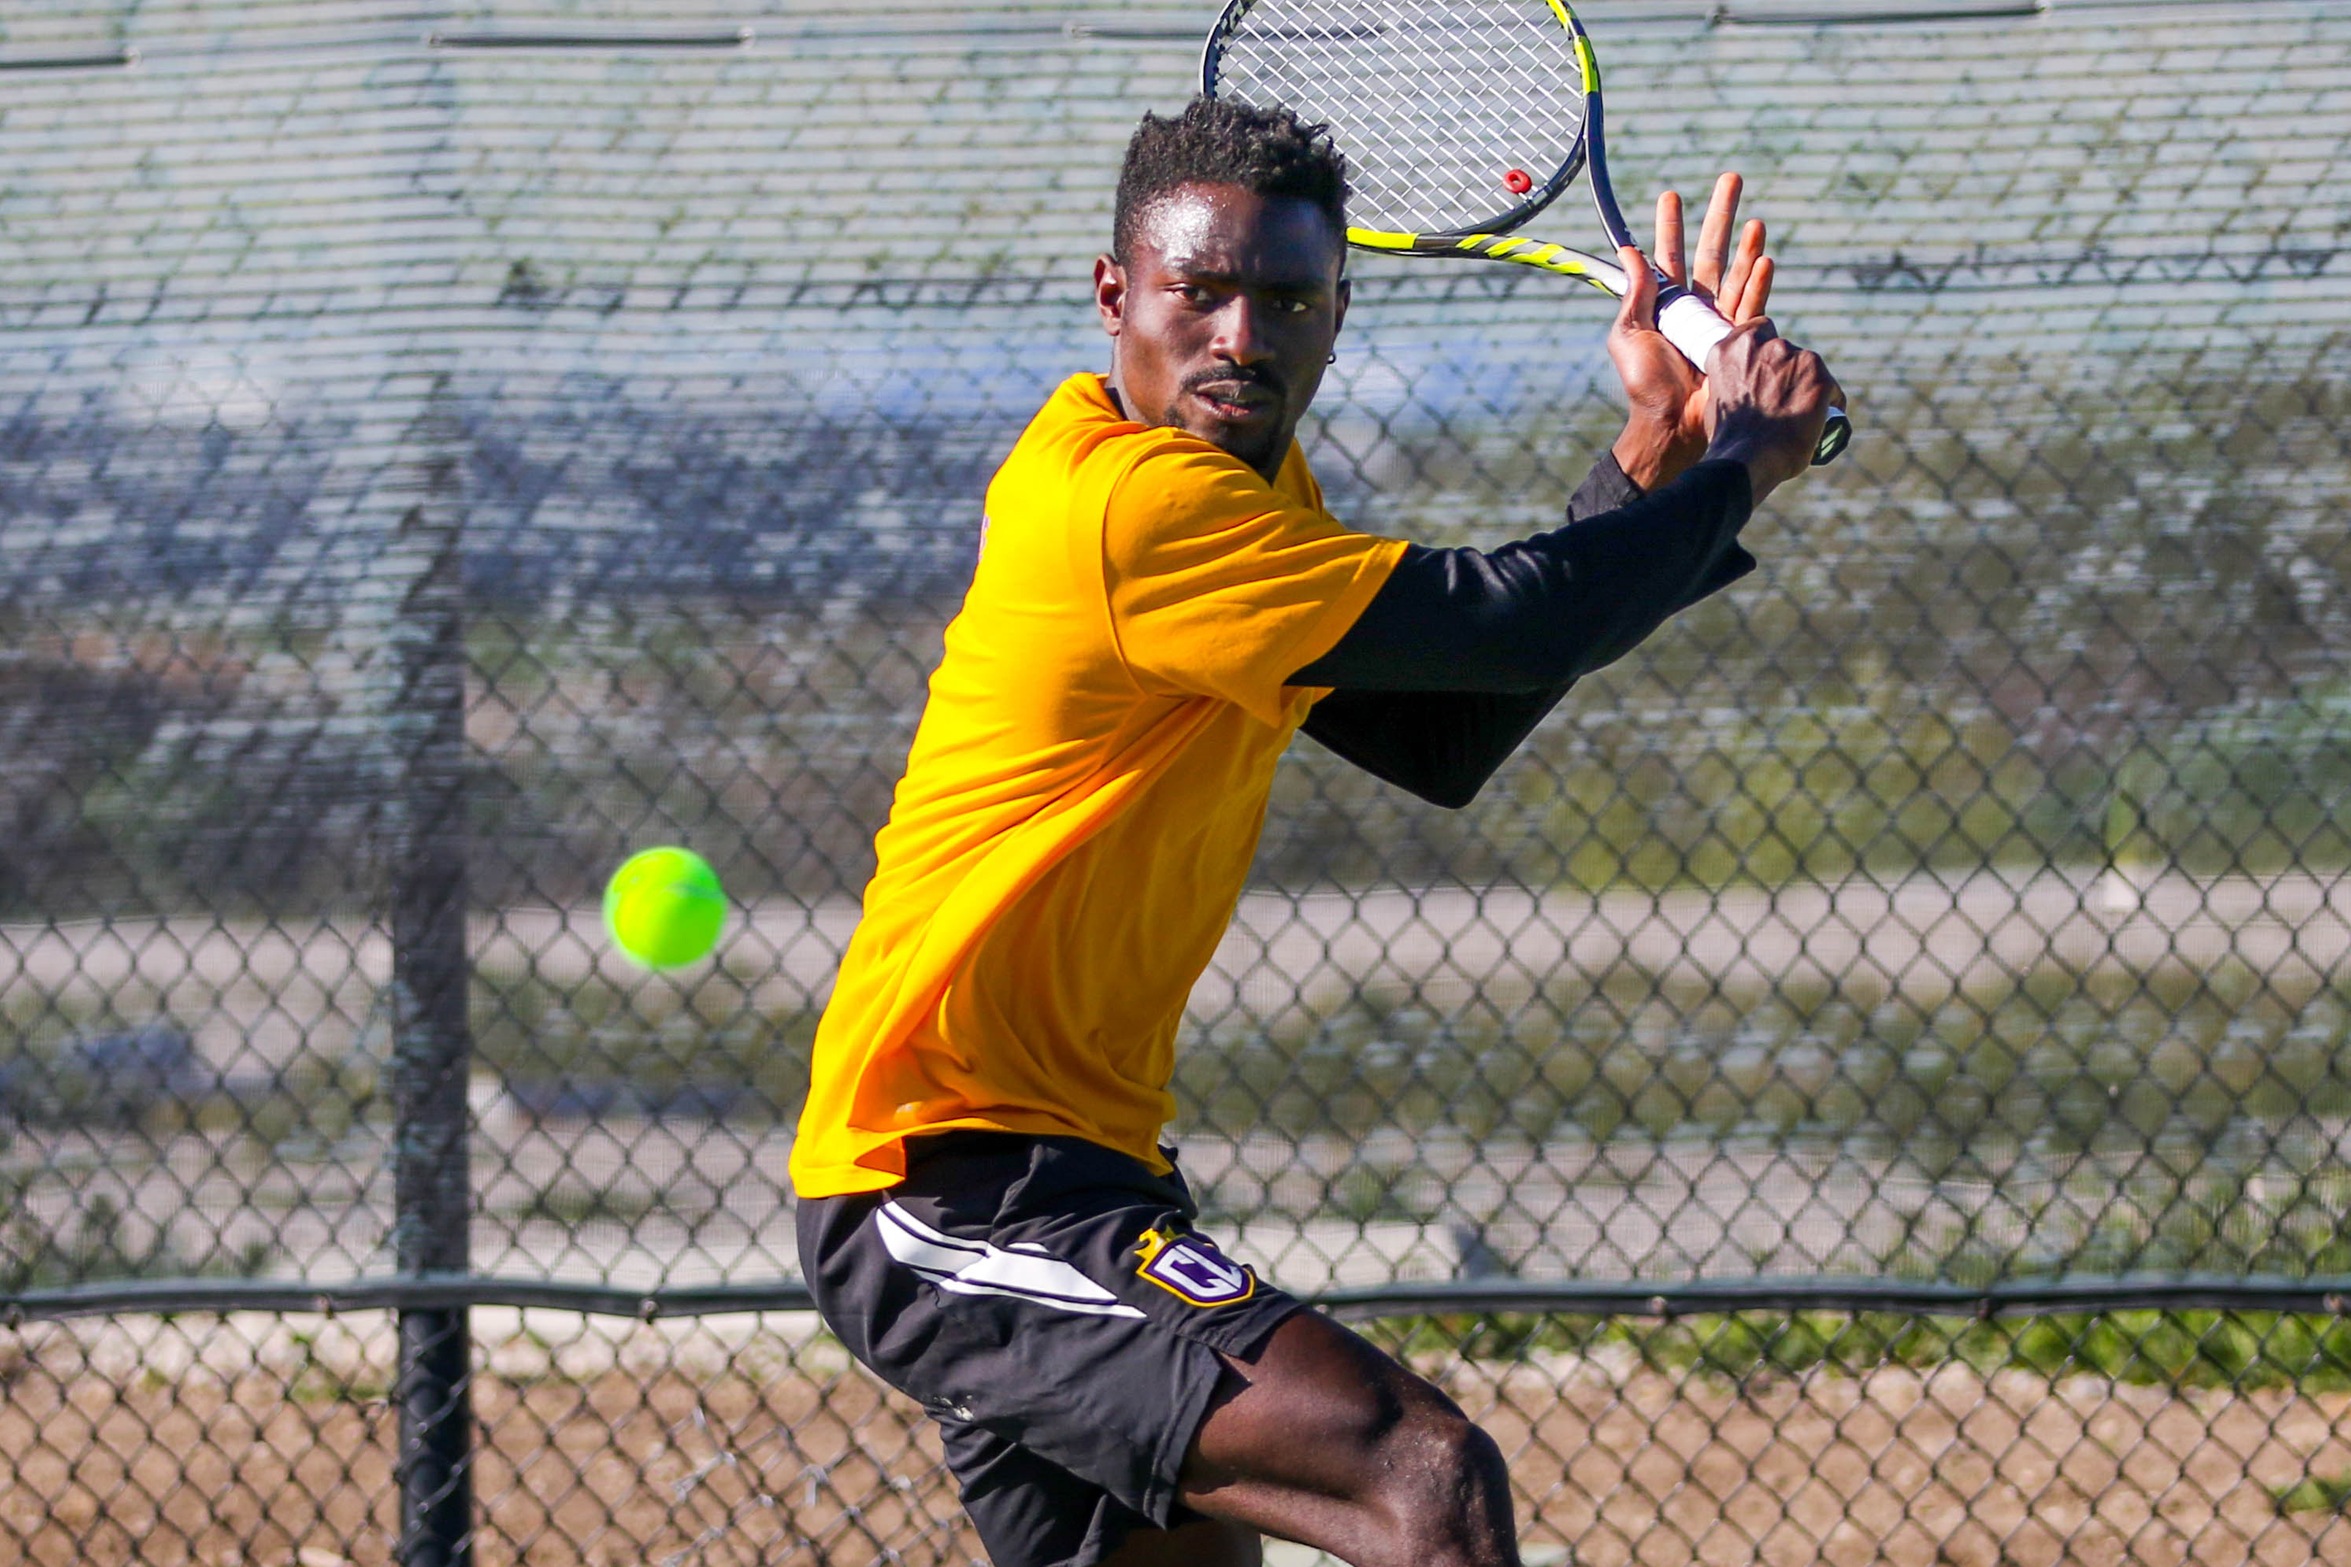 Kingsmen Unable To Upset Bulldogs; Lossangoye Takes Wins In Both Doubles And Singles